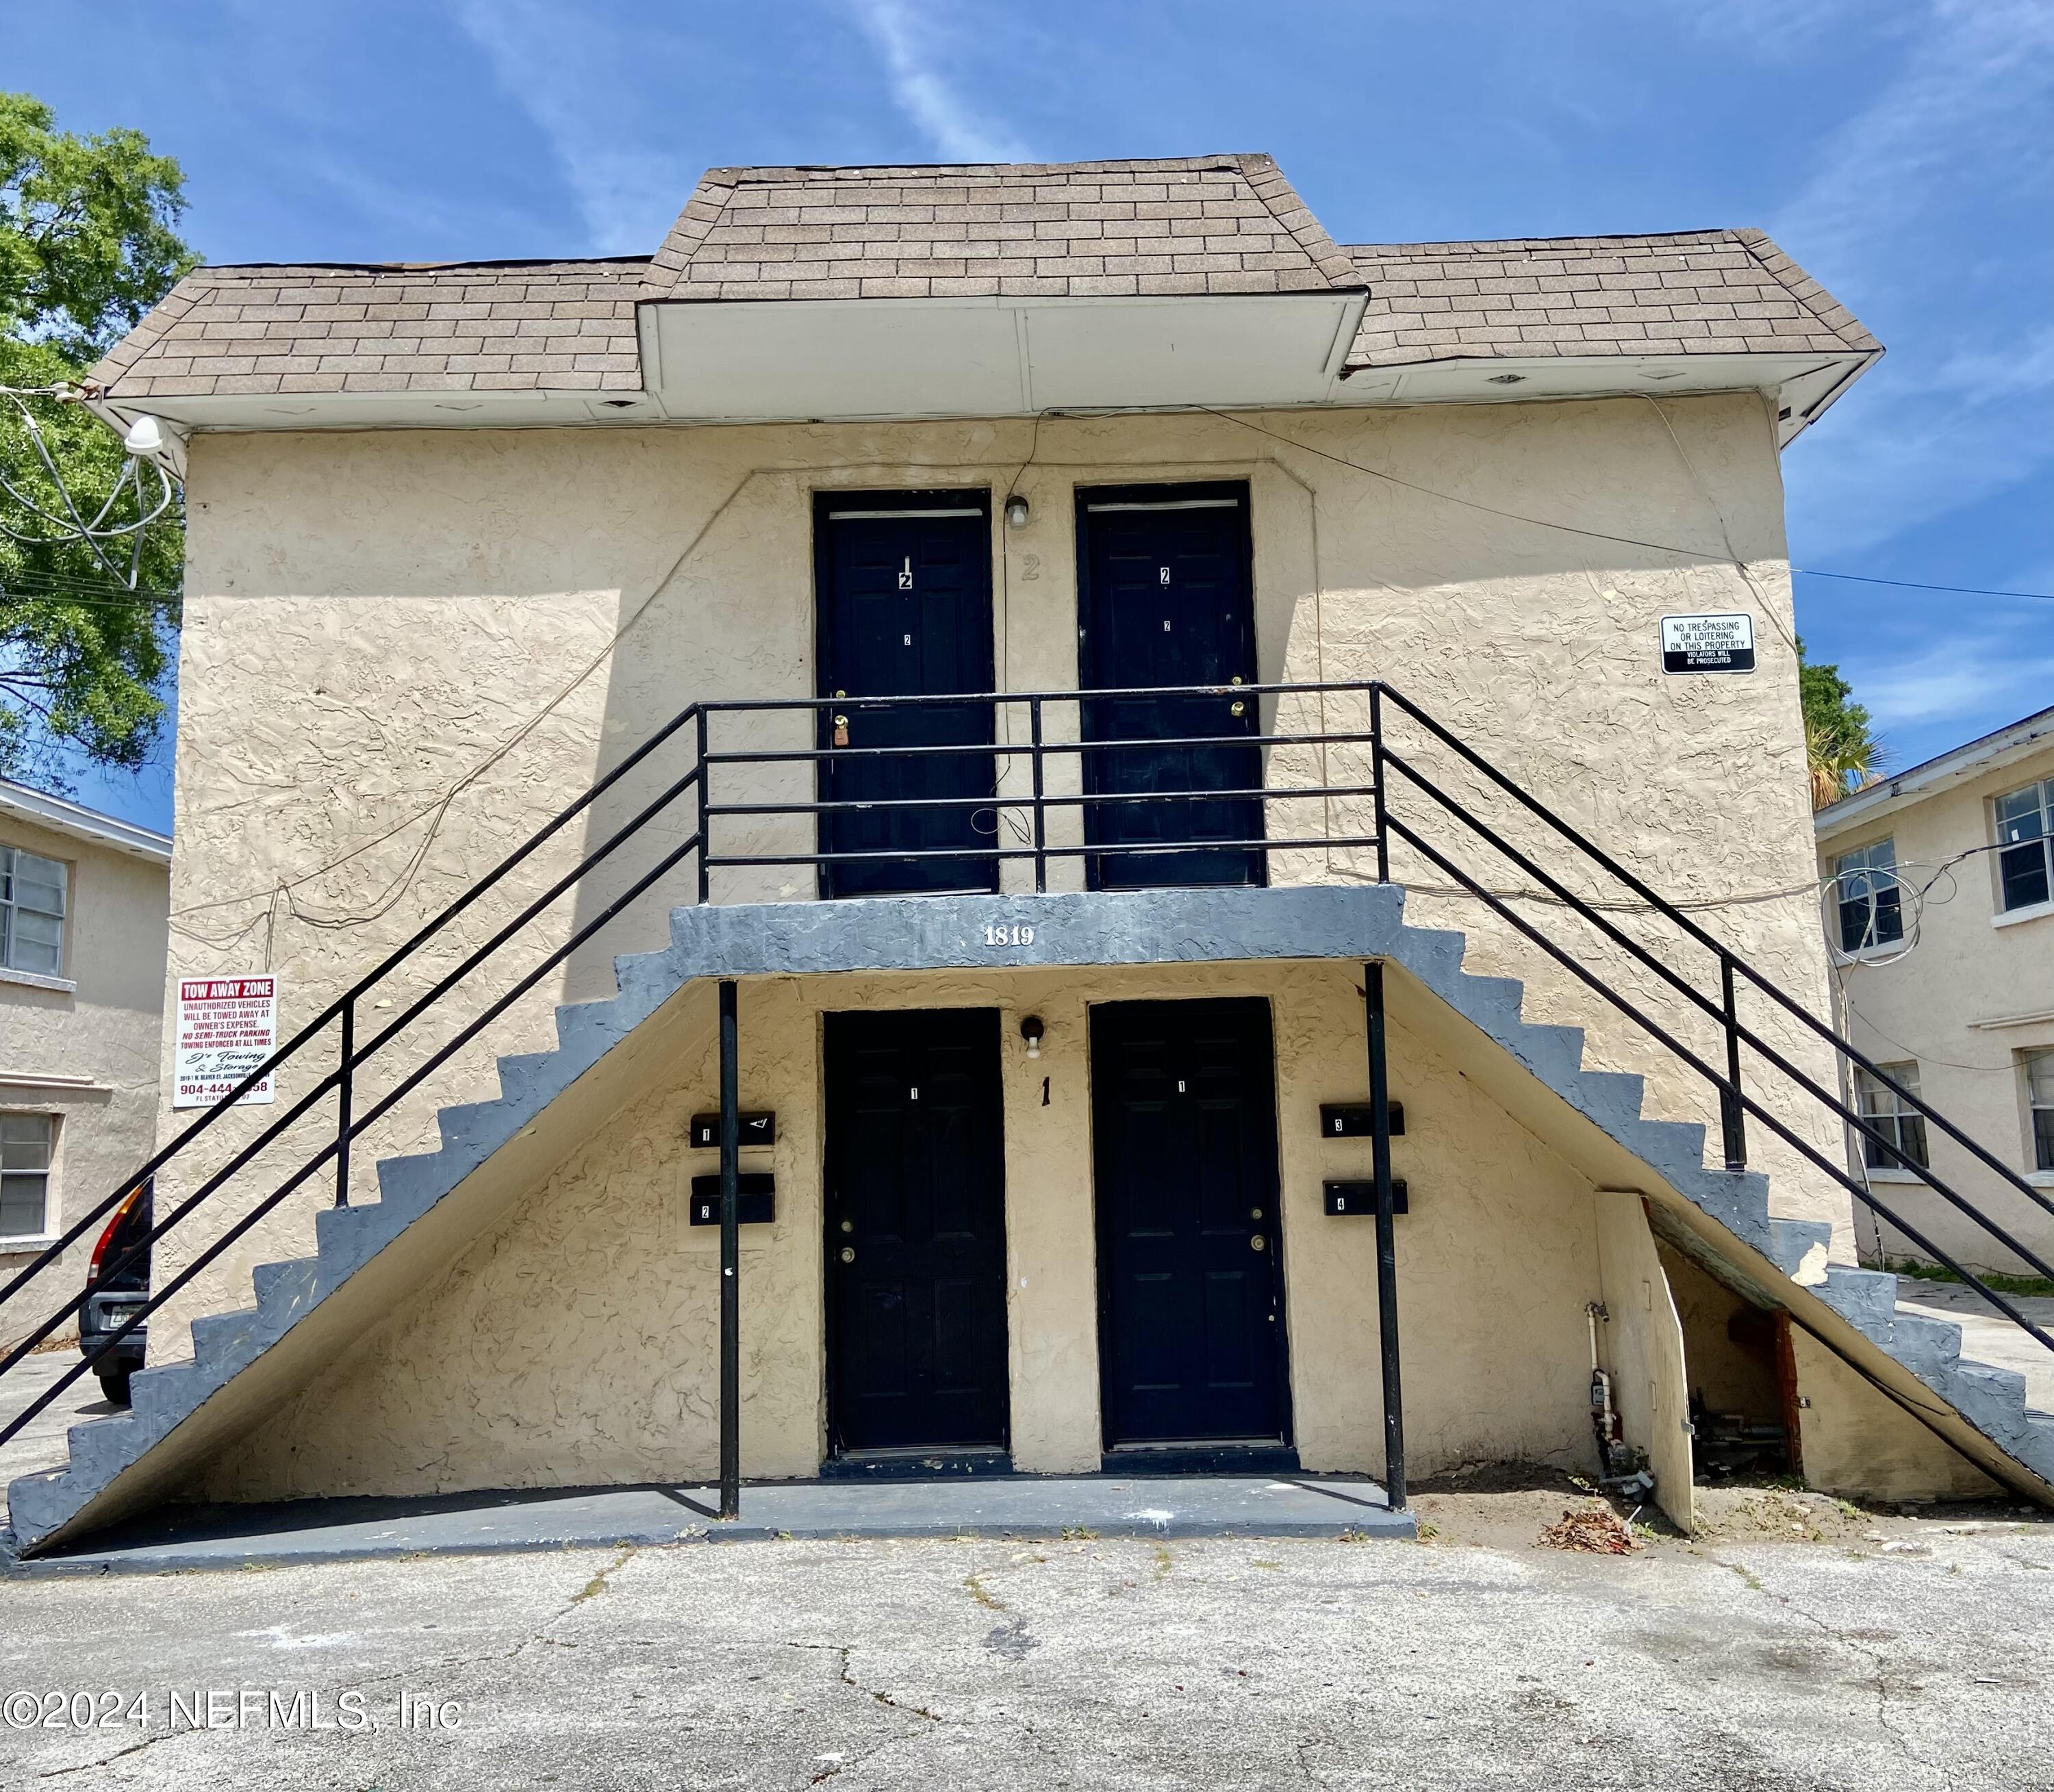 Jacksonville, FL home for sale located at 1819 W 6th Street Unit 1, Jacksonville, FL 32209